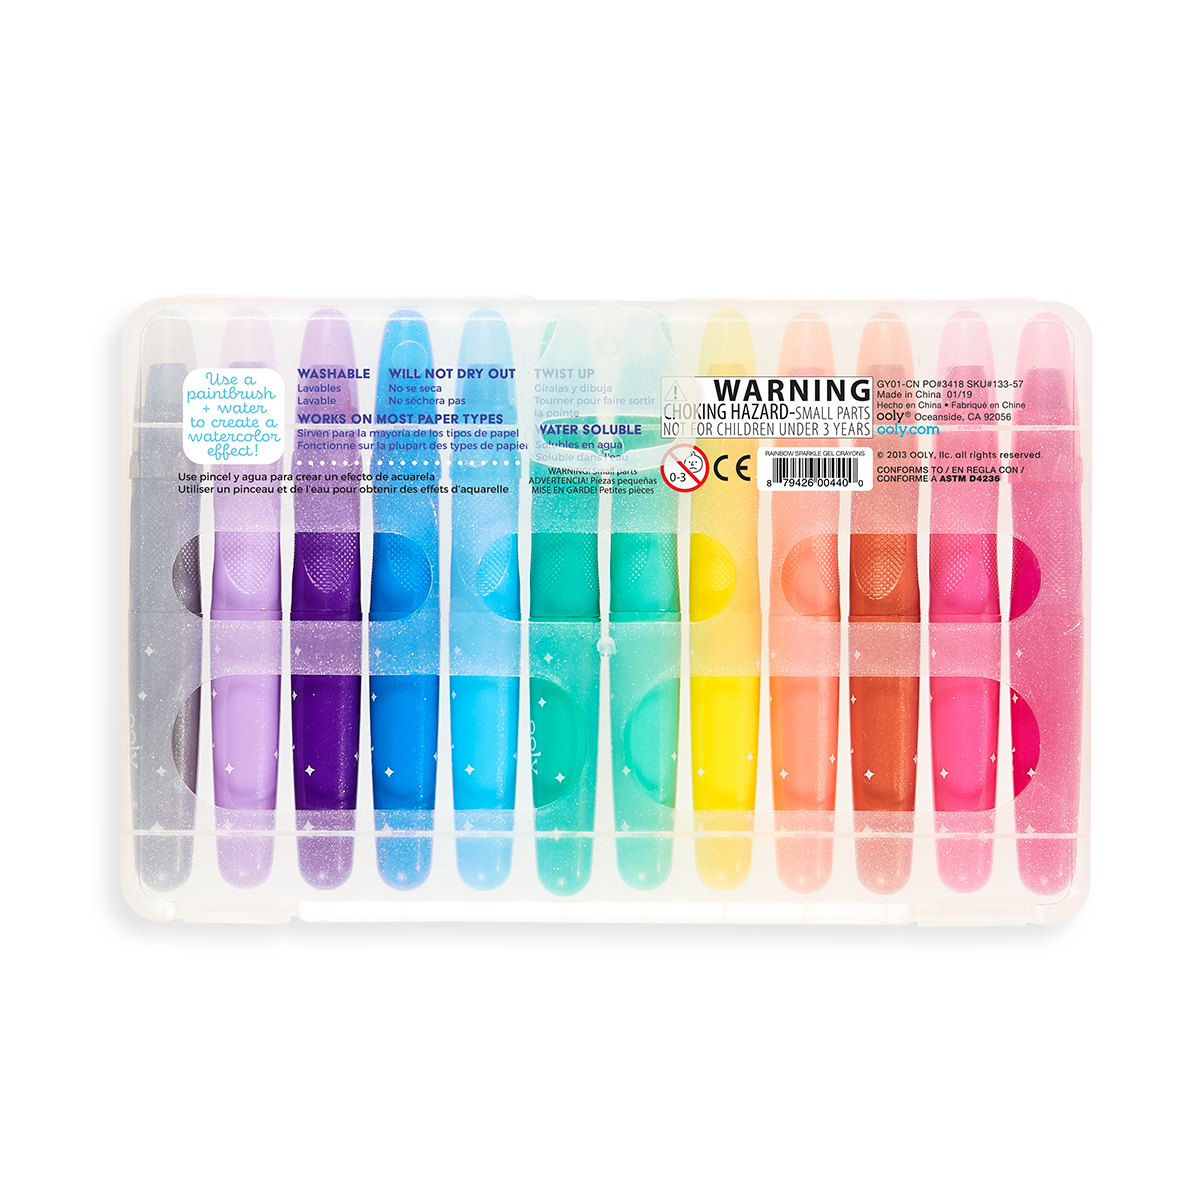 Ooly Smooth Stix Watercolor Gel Crayons - Set of 6 – Baby Central